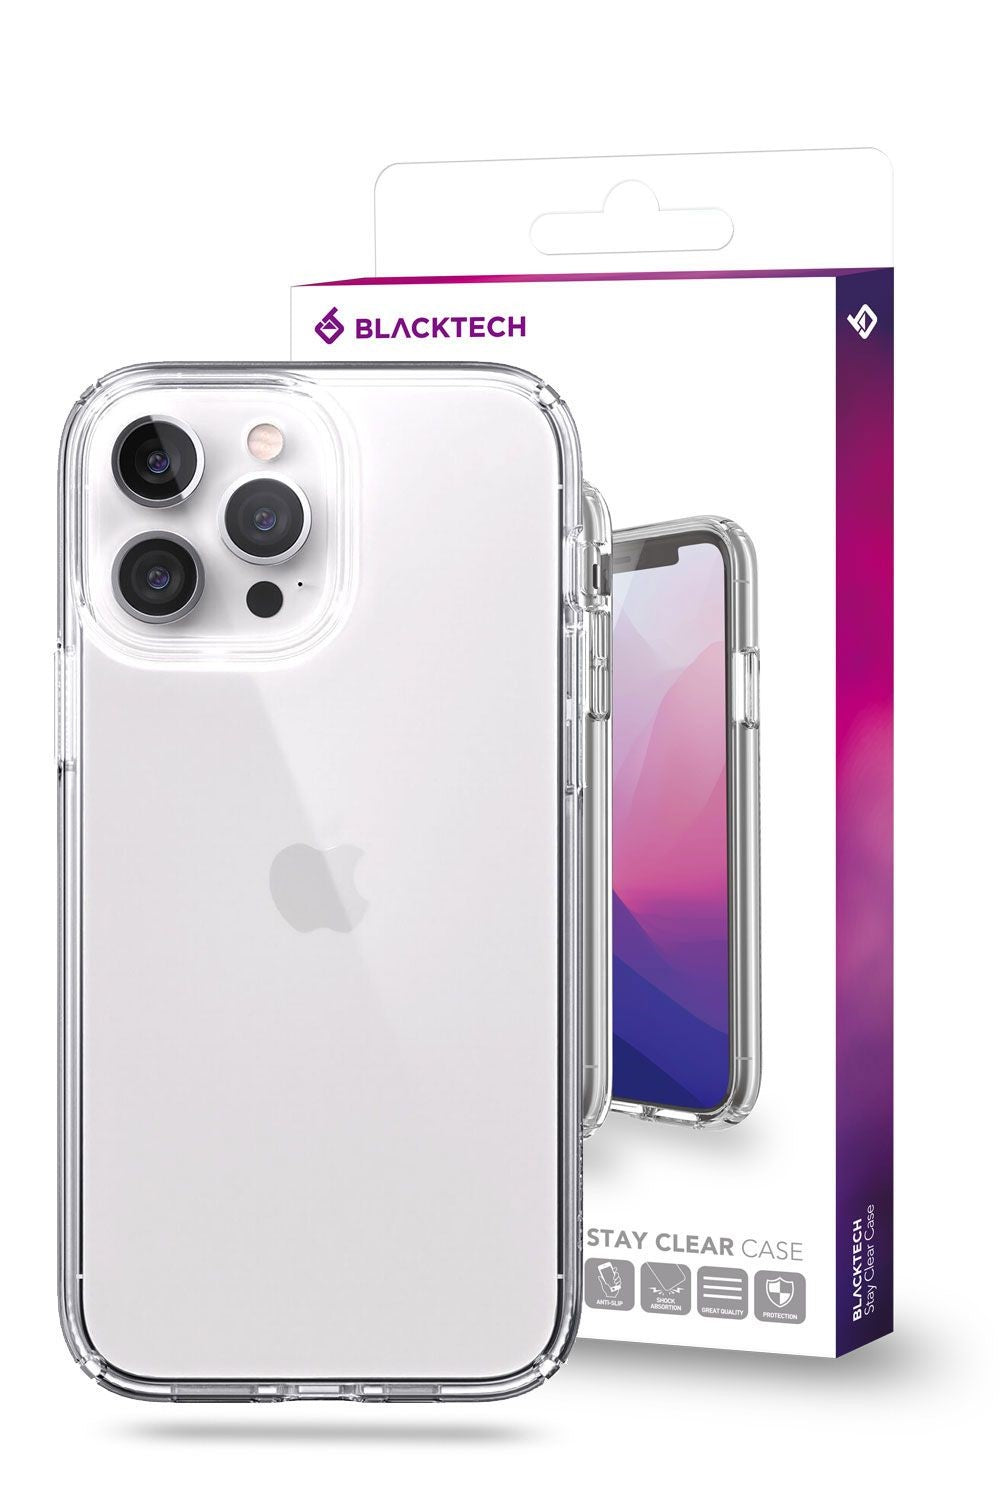 Blacktech iPhone 12 Pro Max Stay Thick Rugged Clear Protective Case